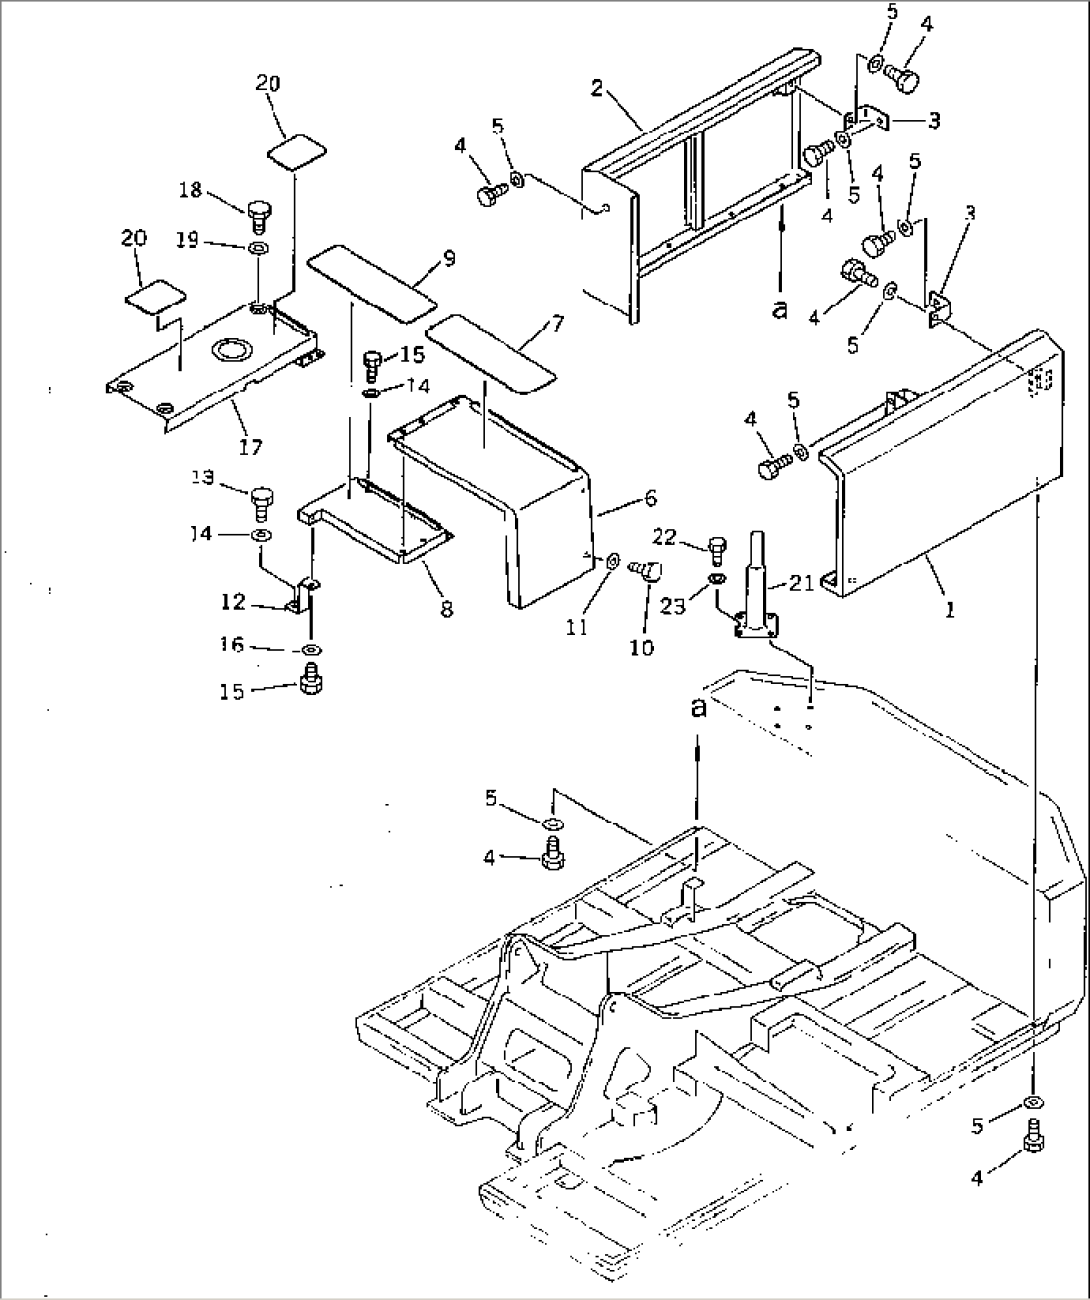 MACHINERY COMPARTMENT (1/3) (REGULATION OF SWEDEN)